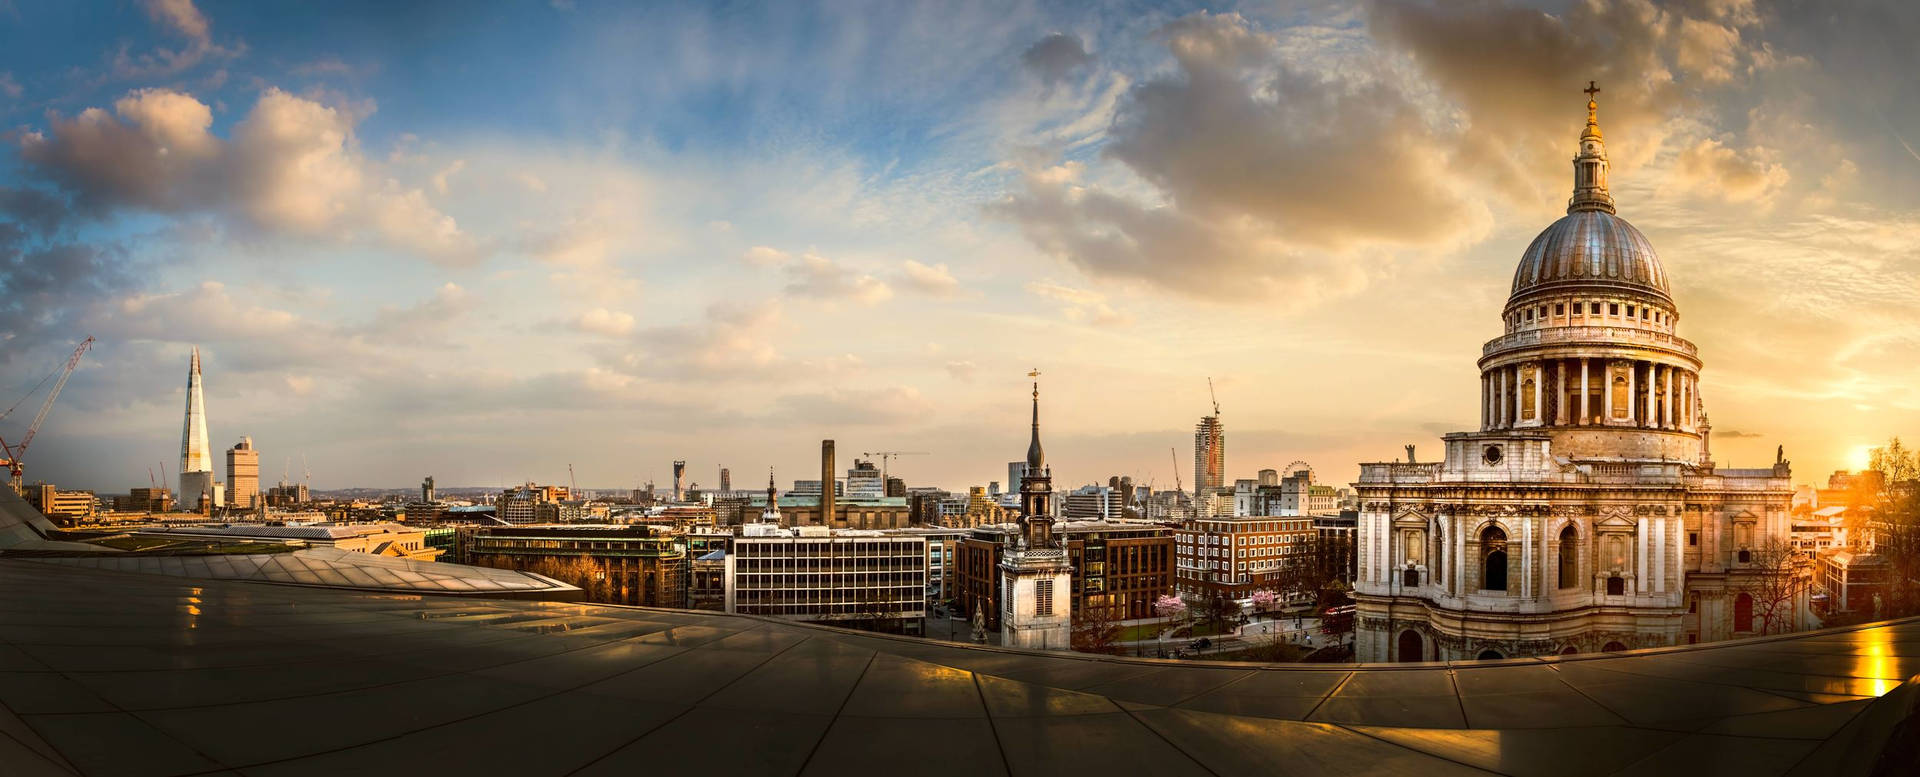 St Paul City Of London Panorama Picture